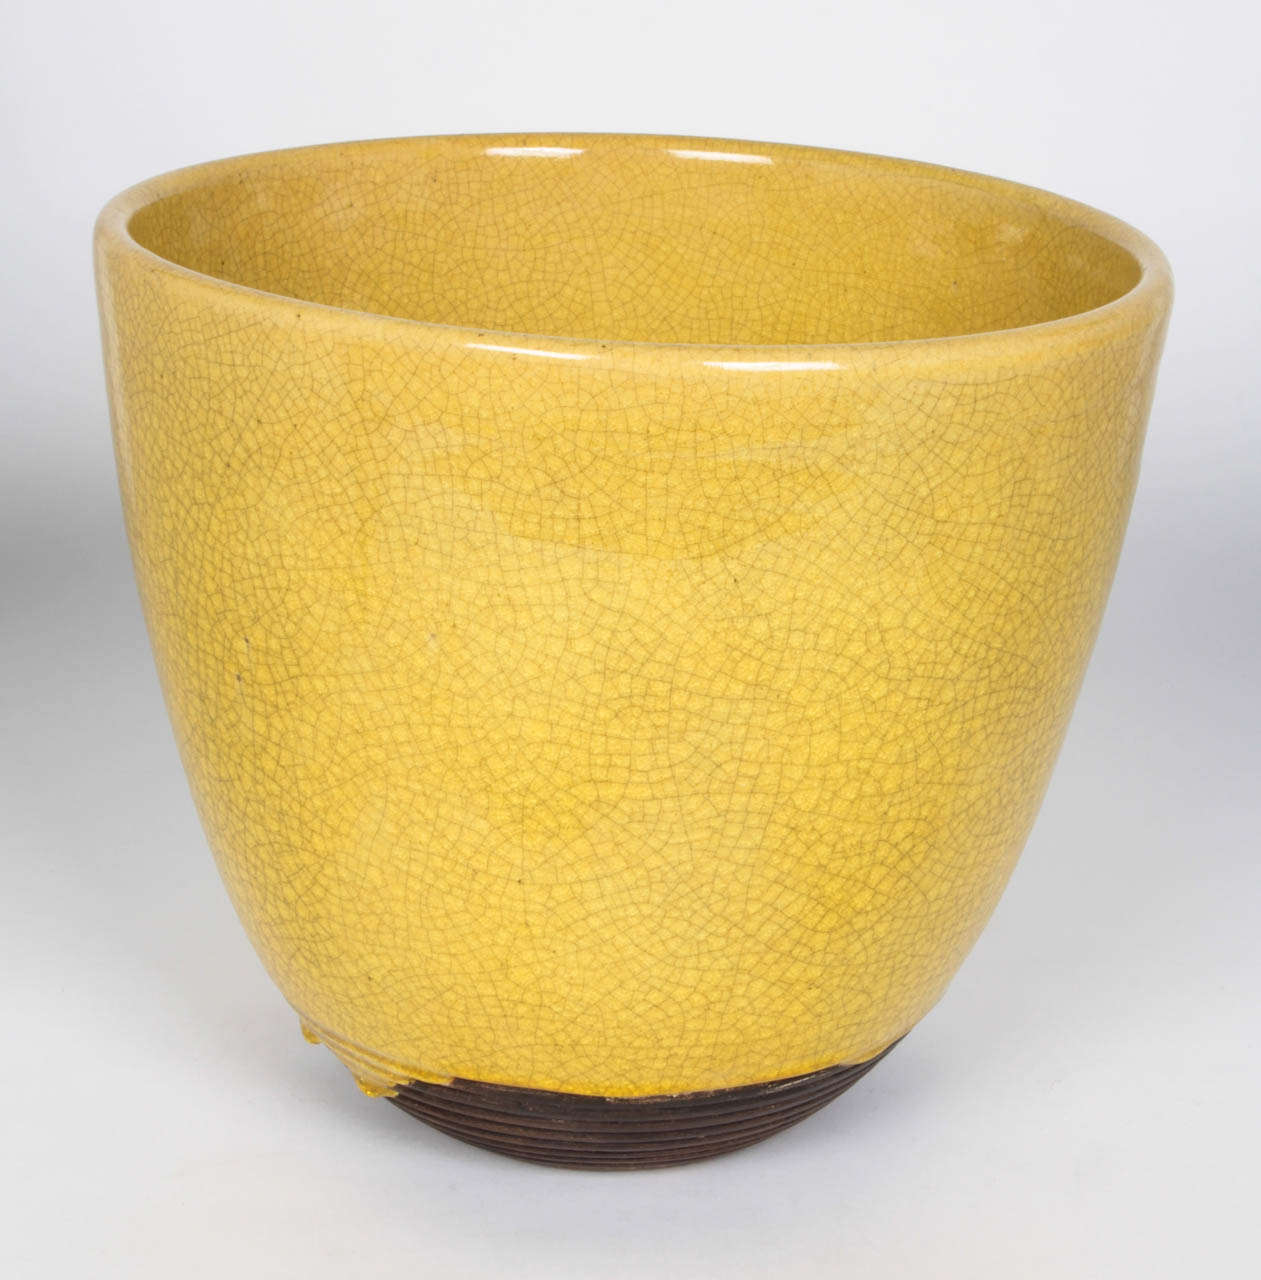 LAURA ANDRESON  (1902-1999)  USA

Vase   1935

Hand-thrown and incised earthenware with goldenrod yellow, 
viscous glaze with rich craquelure surface

Signed: Laura Andreson (on base), 1935

For more information see:  The Potter’s Art in